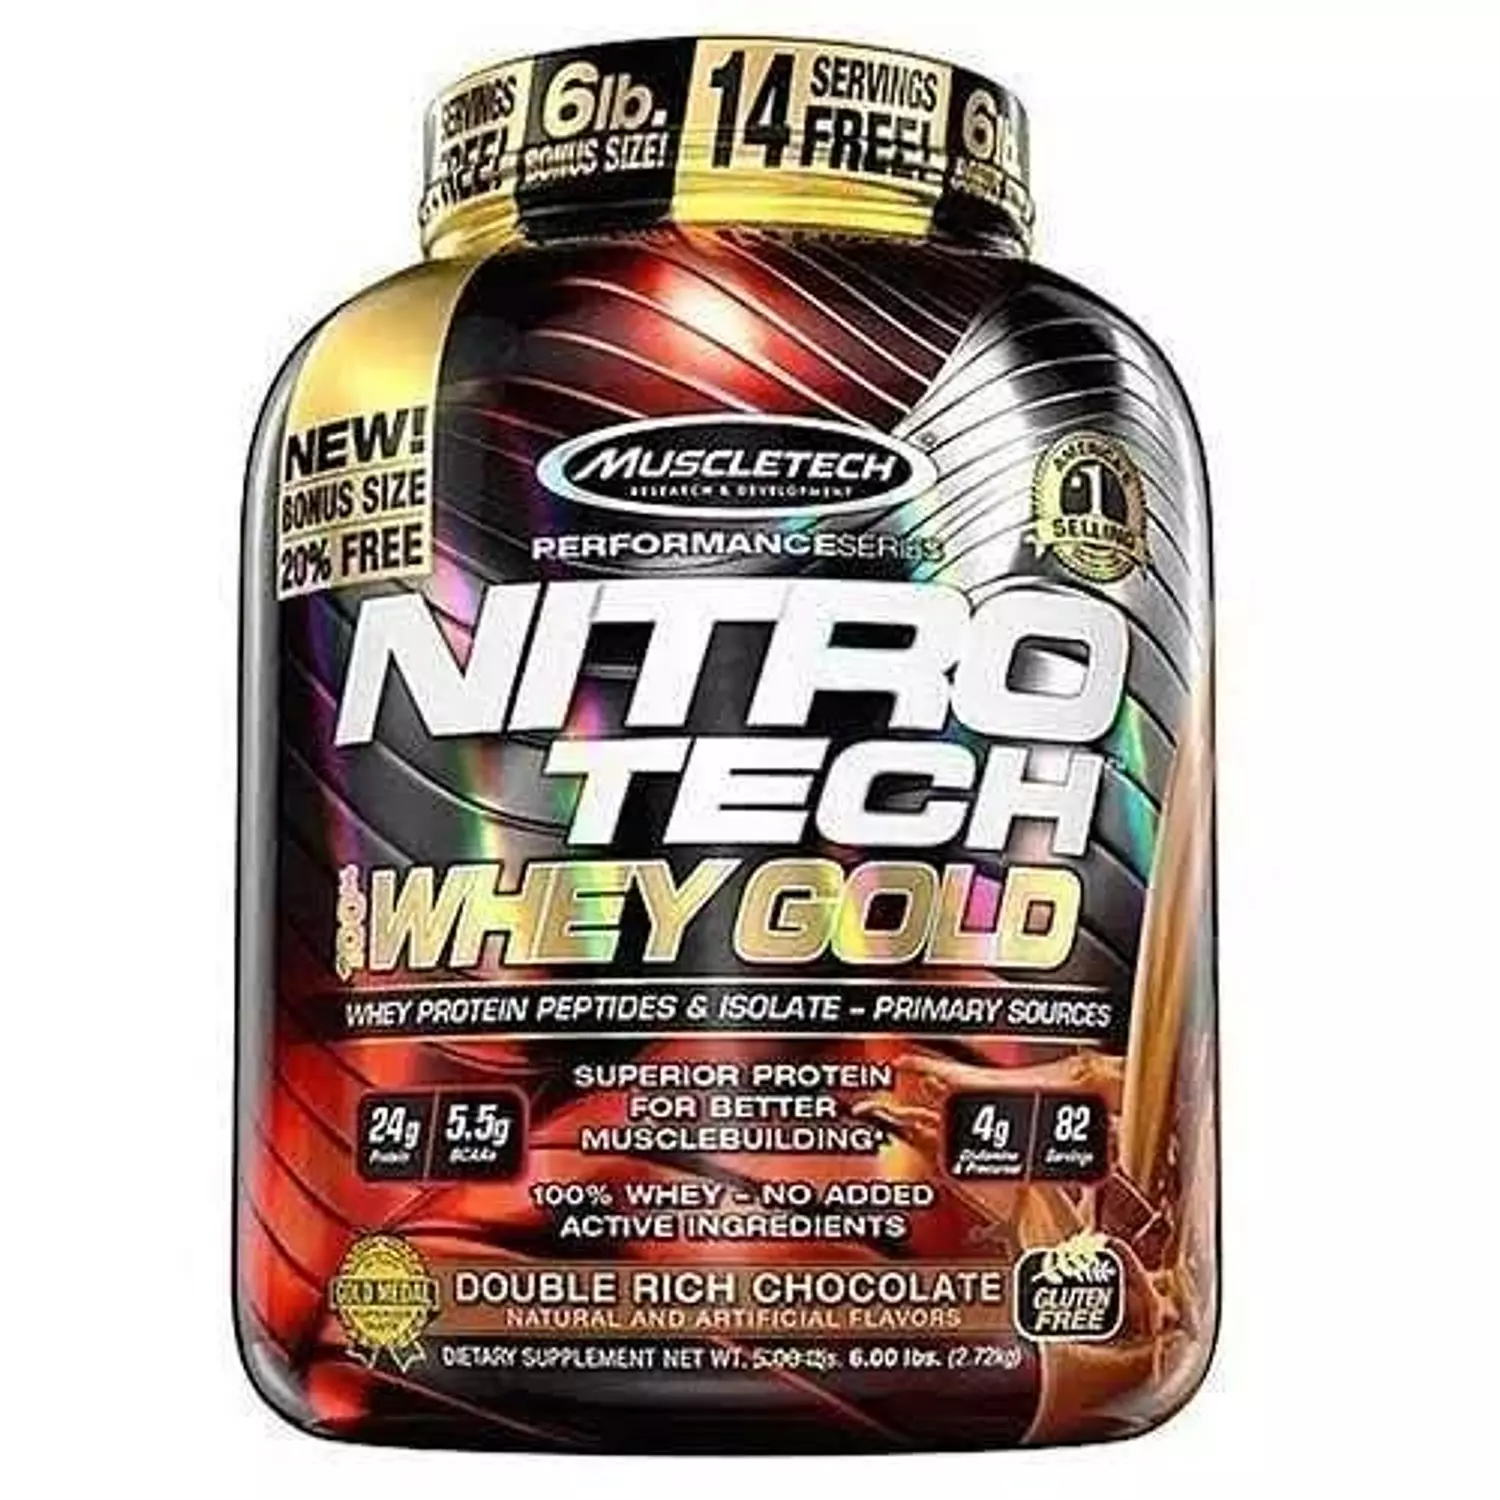 Nitrotech Whey Gold hover image